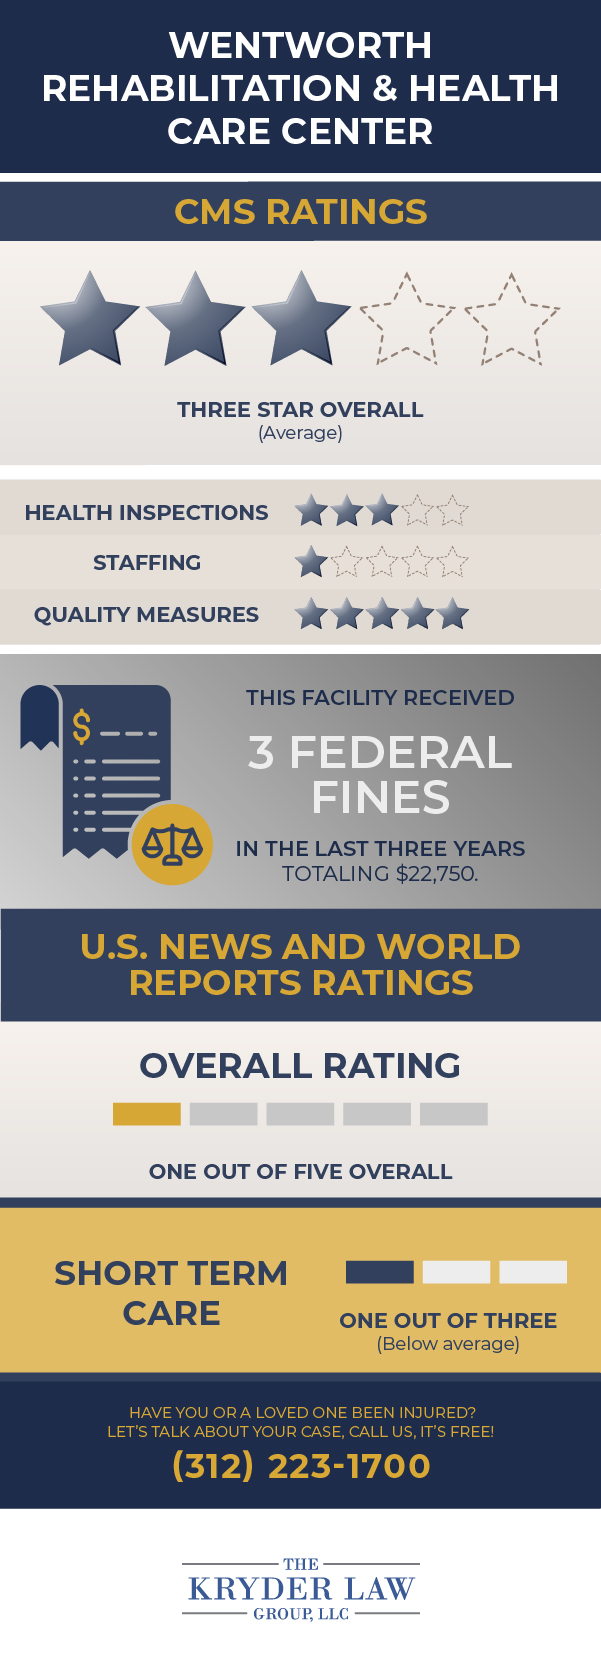 Wentworth Rehabilitation & Health Care Center CMS Ratings & U.S News and World Reports Ratings